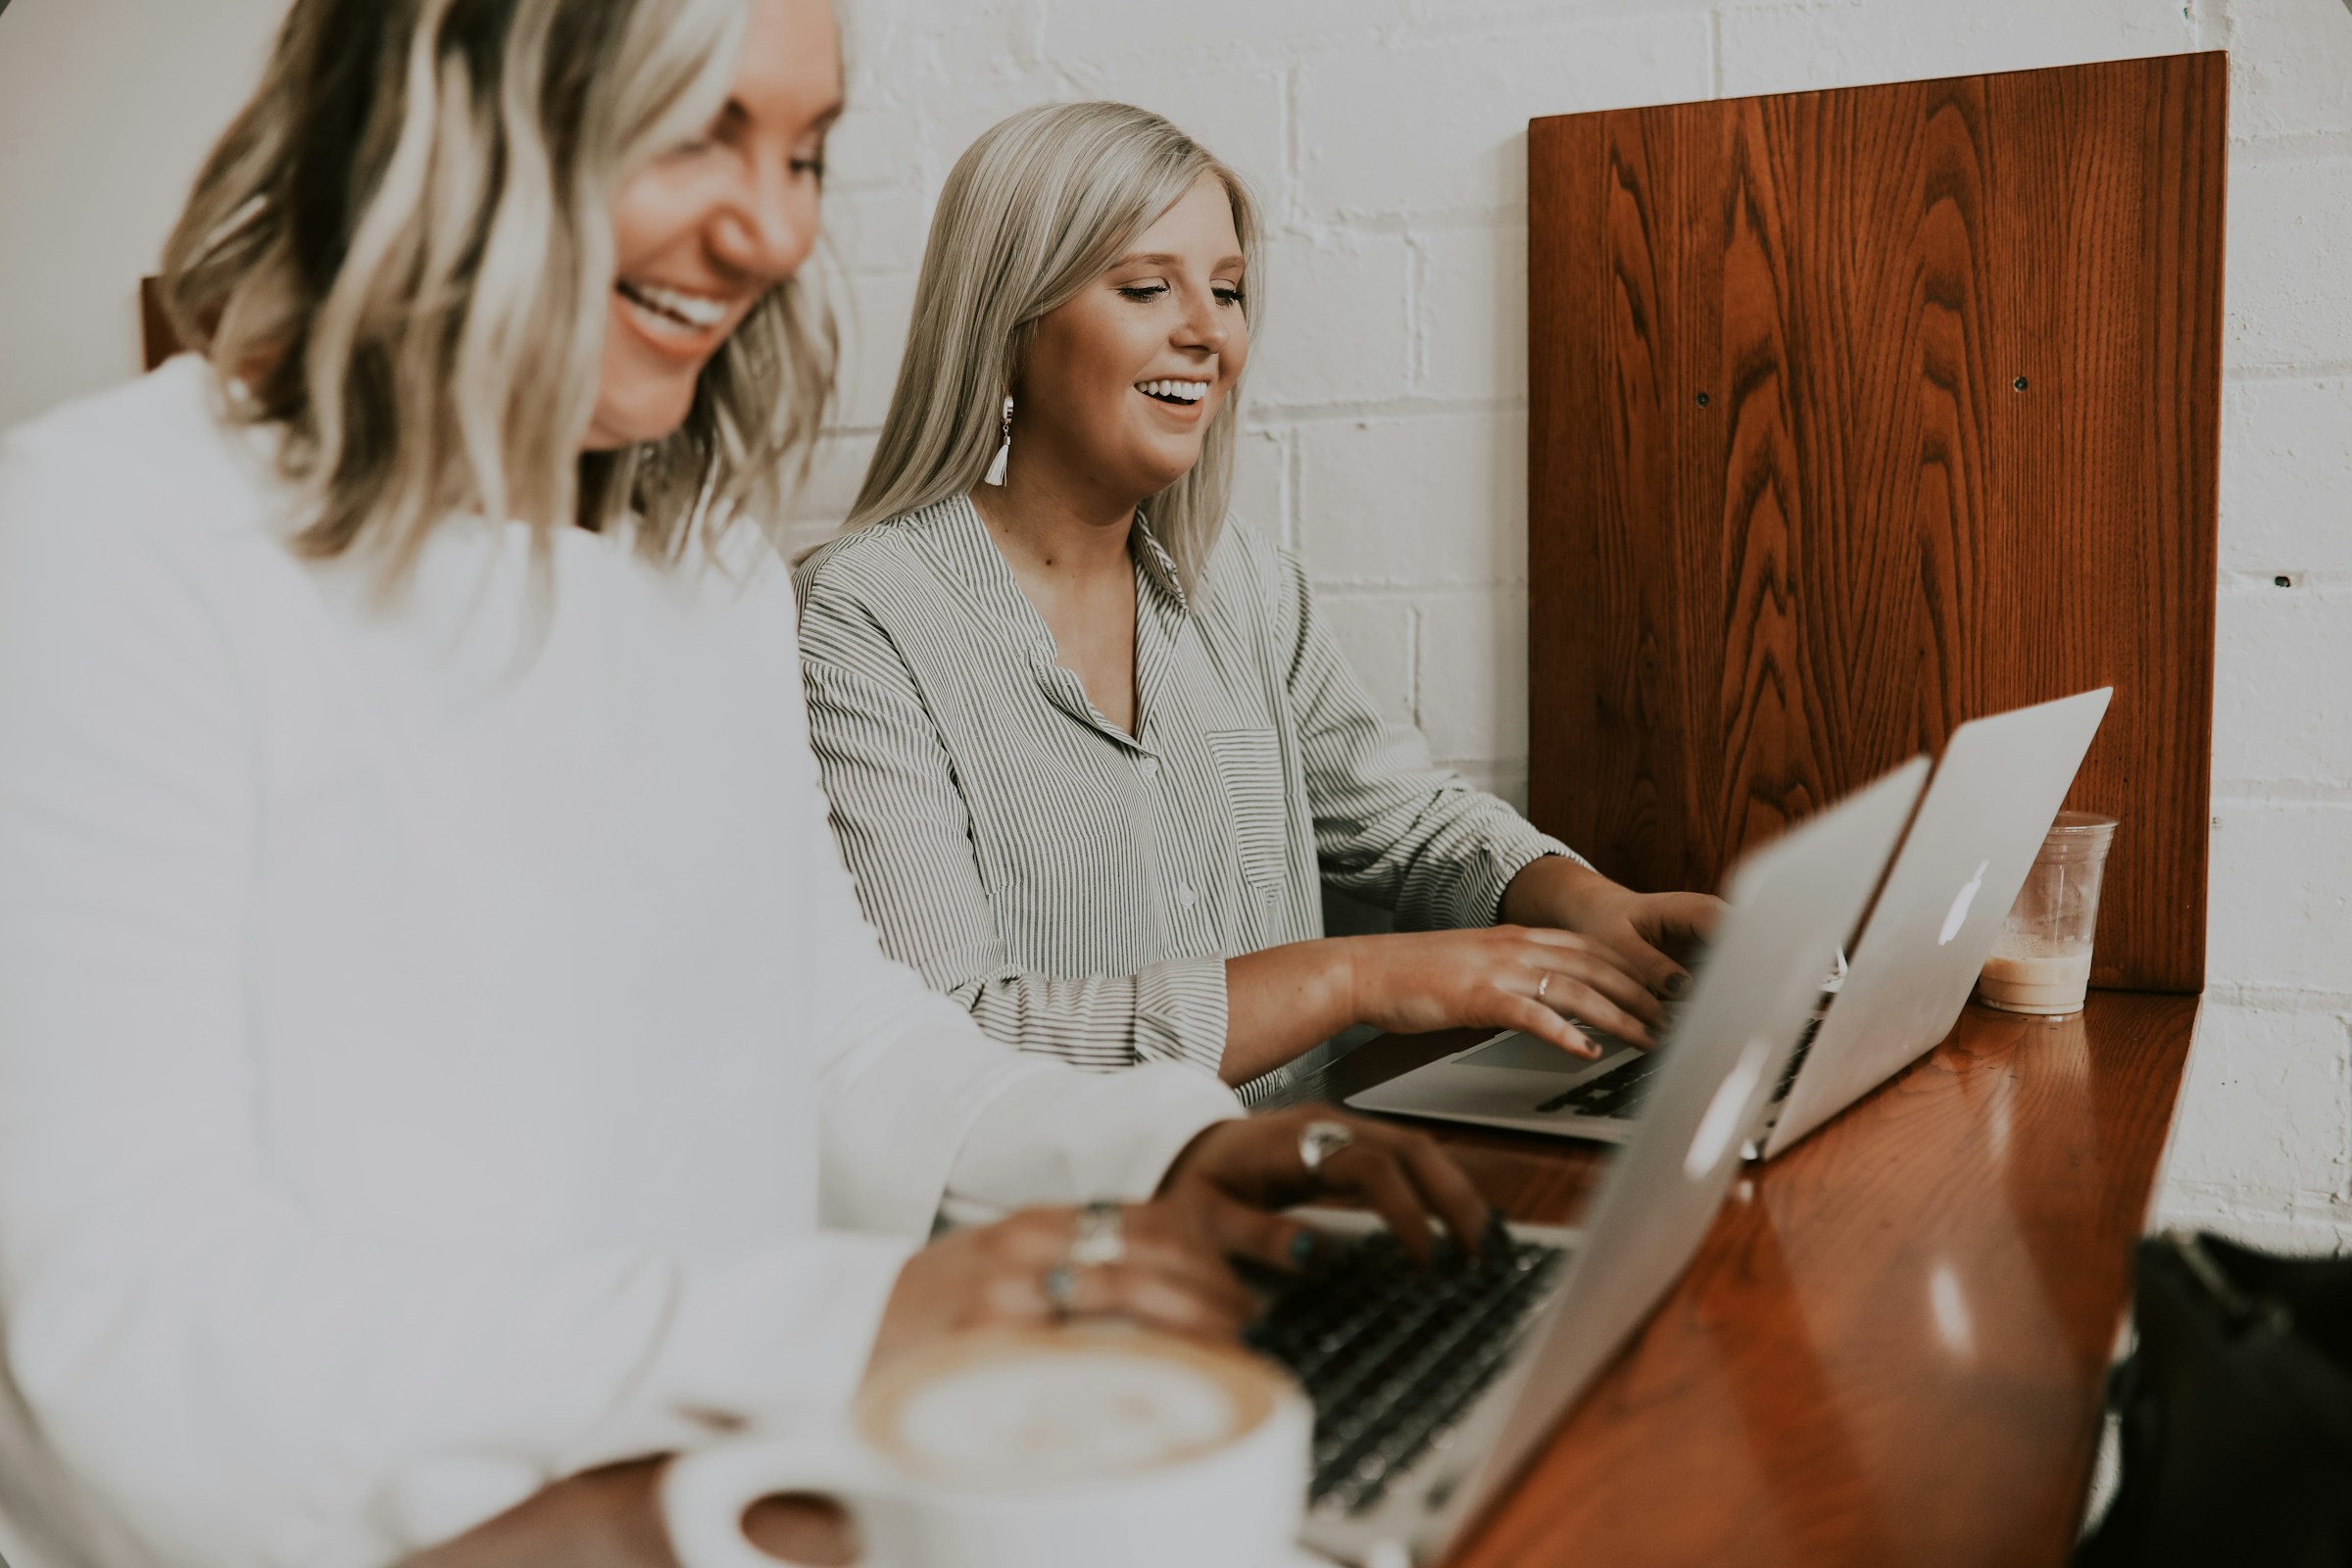 Two women laughing while using their laptops in an office setting | Source: Unsplash